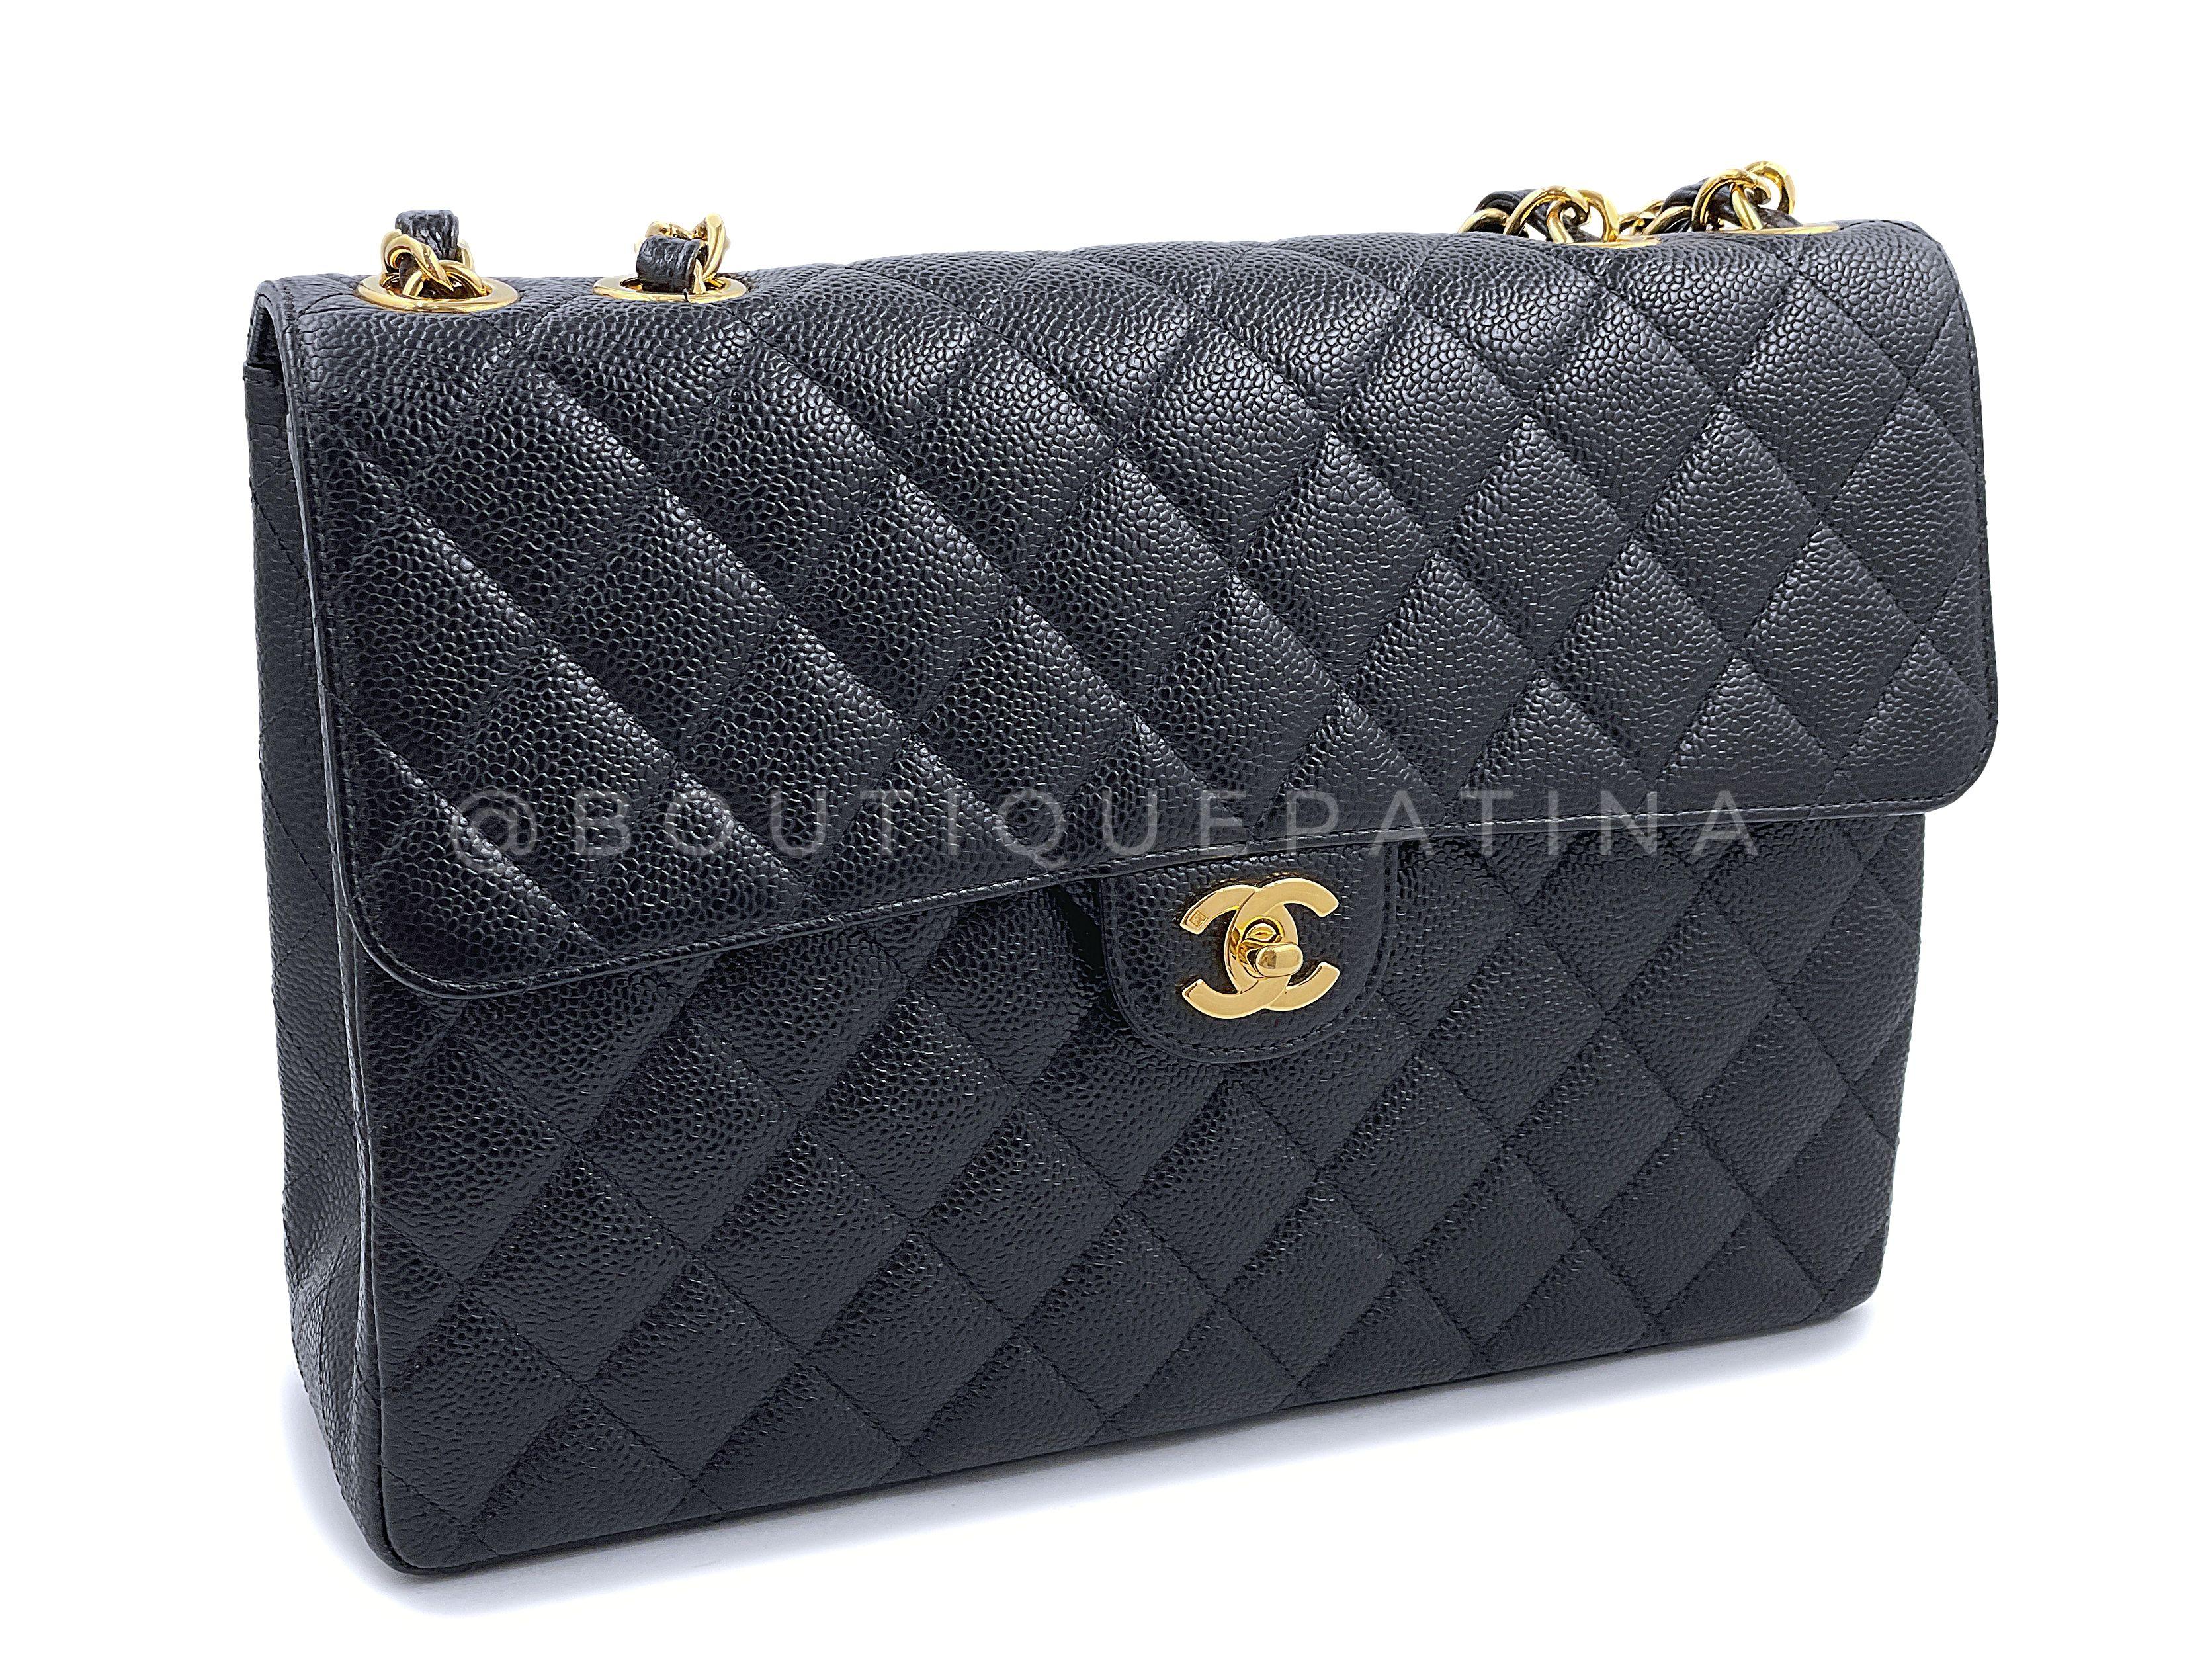 Pristine Chanel 2002 Vintage Black Caviar Jumbo Classic Flap Bag 24k GHW 67313 In Excellent Condition For Sale In Costa Mesa, CA